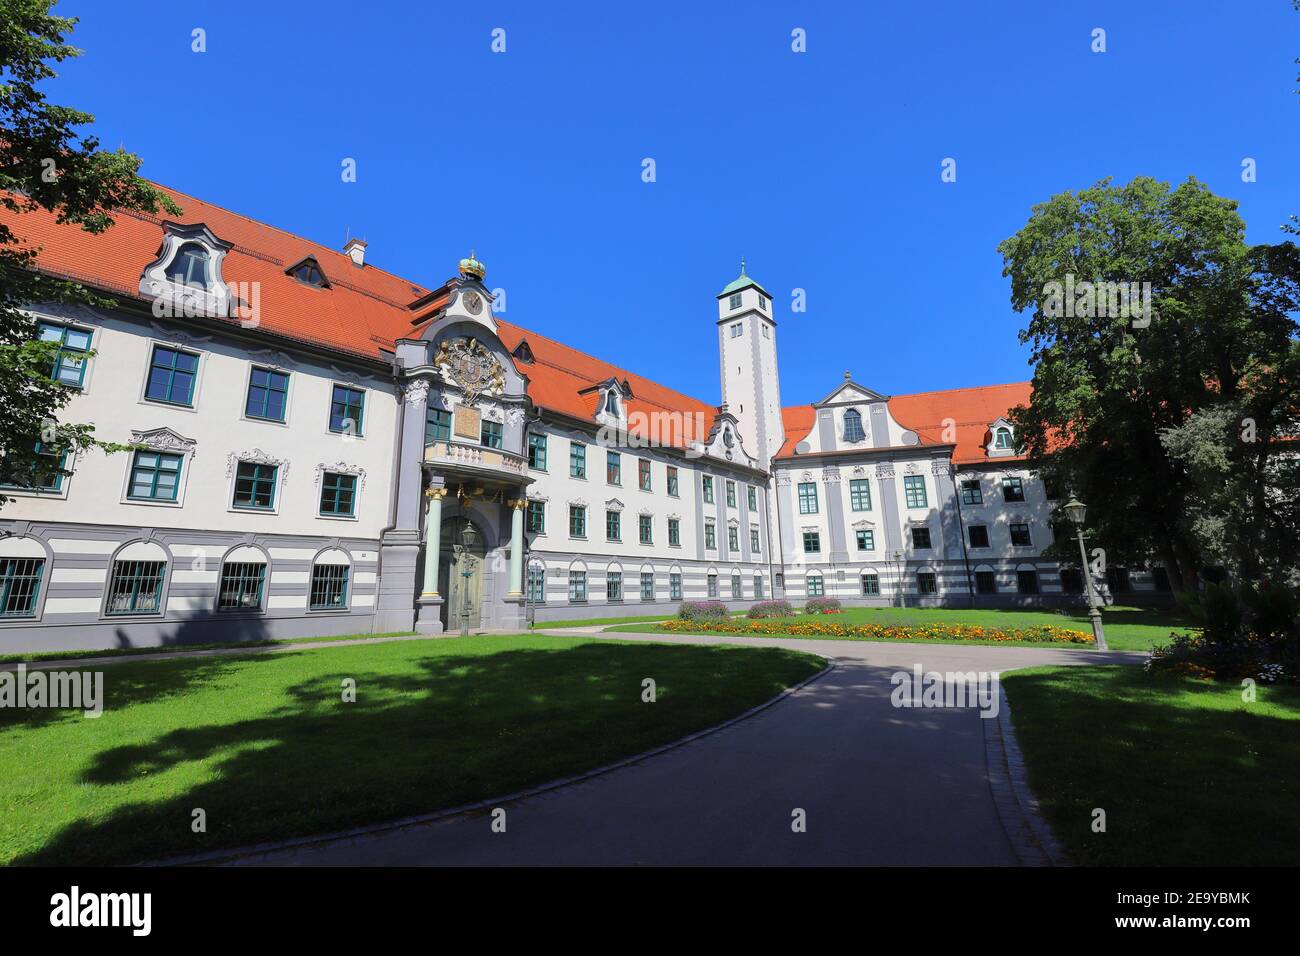 GERMANY, AUGSBURG - AUGUST 18, 2019: Buildings of the Government of Swabia in Augsburg (former the Prince-Bishop's Residence) Stock Photo